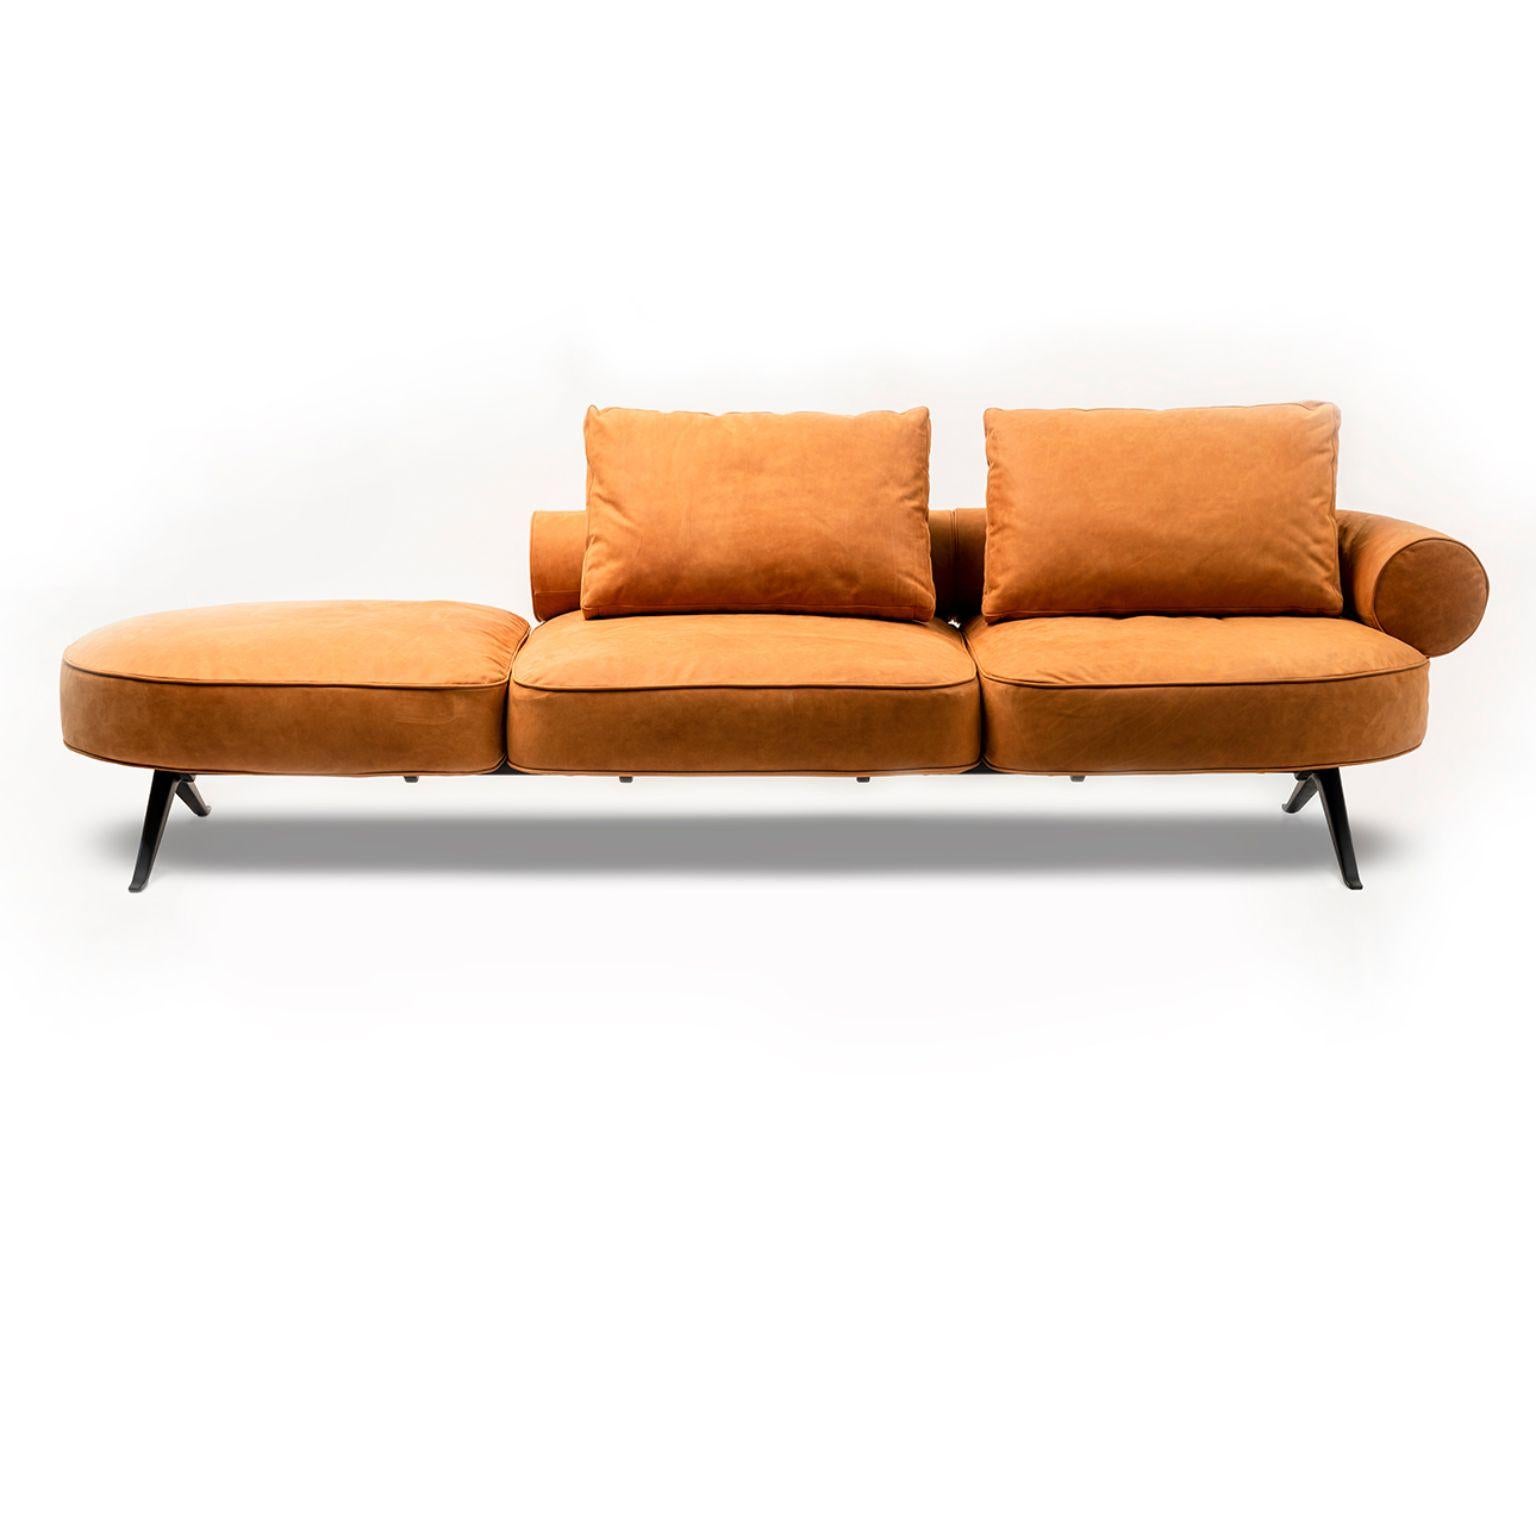 Luizet 3 seats modular sofa by Luca Nichetto
Materials: Upholstery: Fabric (also available in leather)
 Top: Verde Marinace granite/Emperador Silver dark/Emperador Tundra/Red marble/Terrazzo 
 Botticino marble or Noce Canaletto wood
Structure: